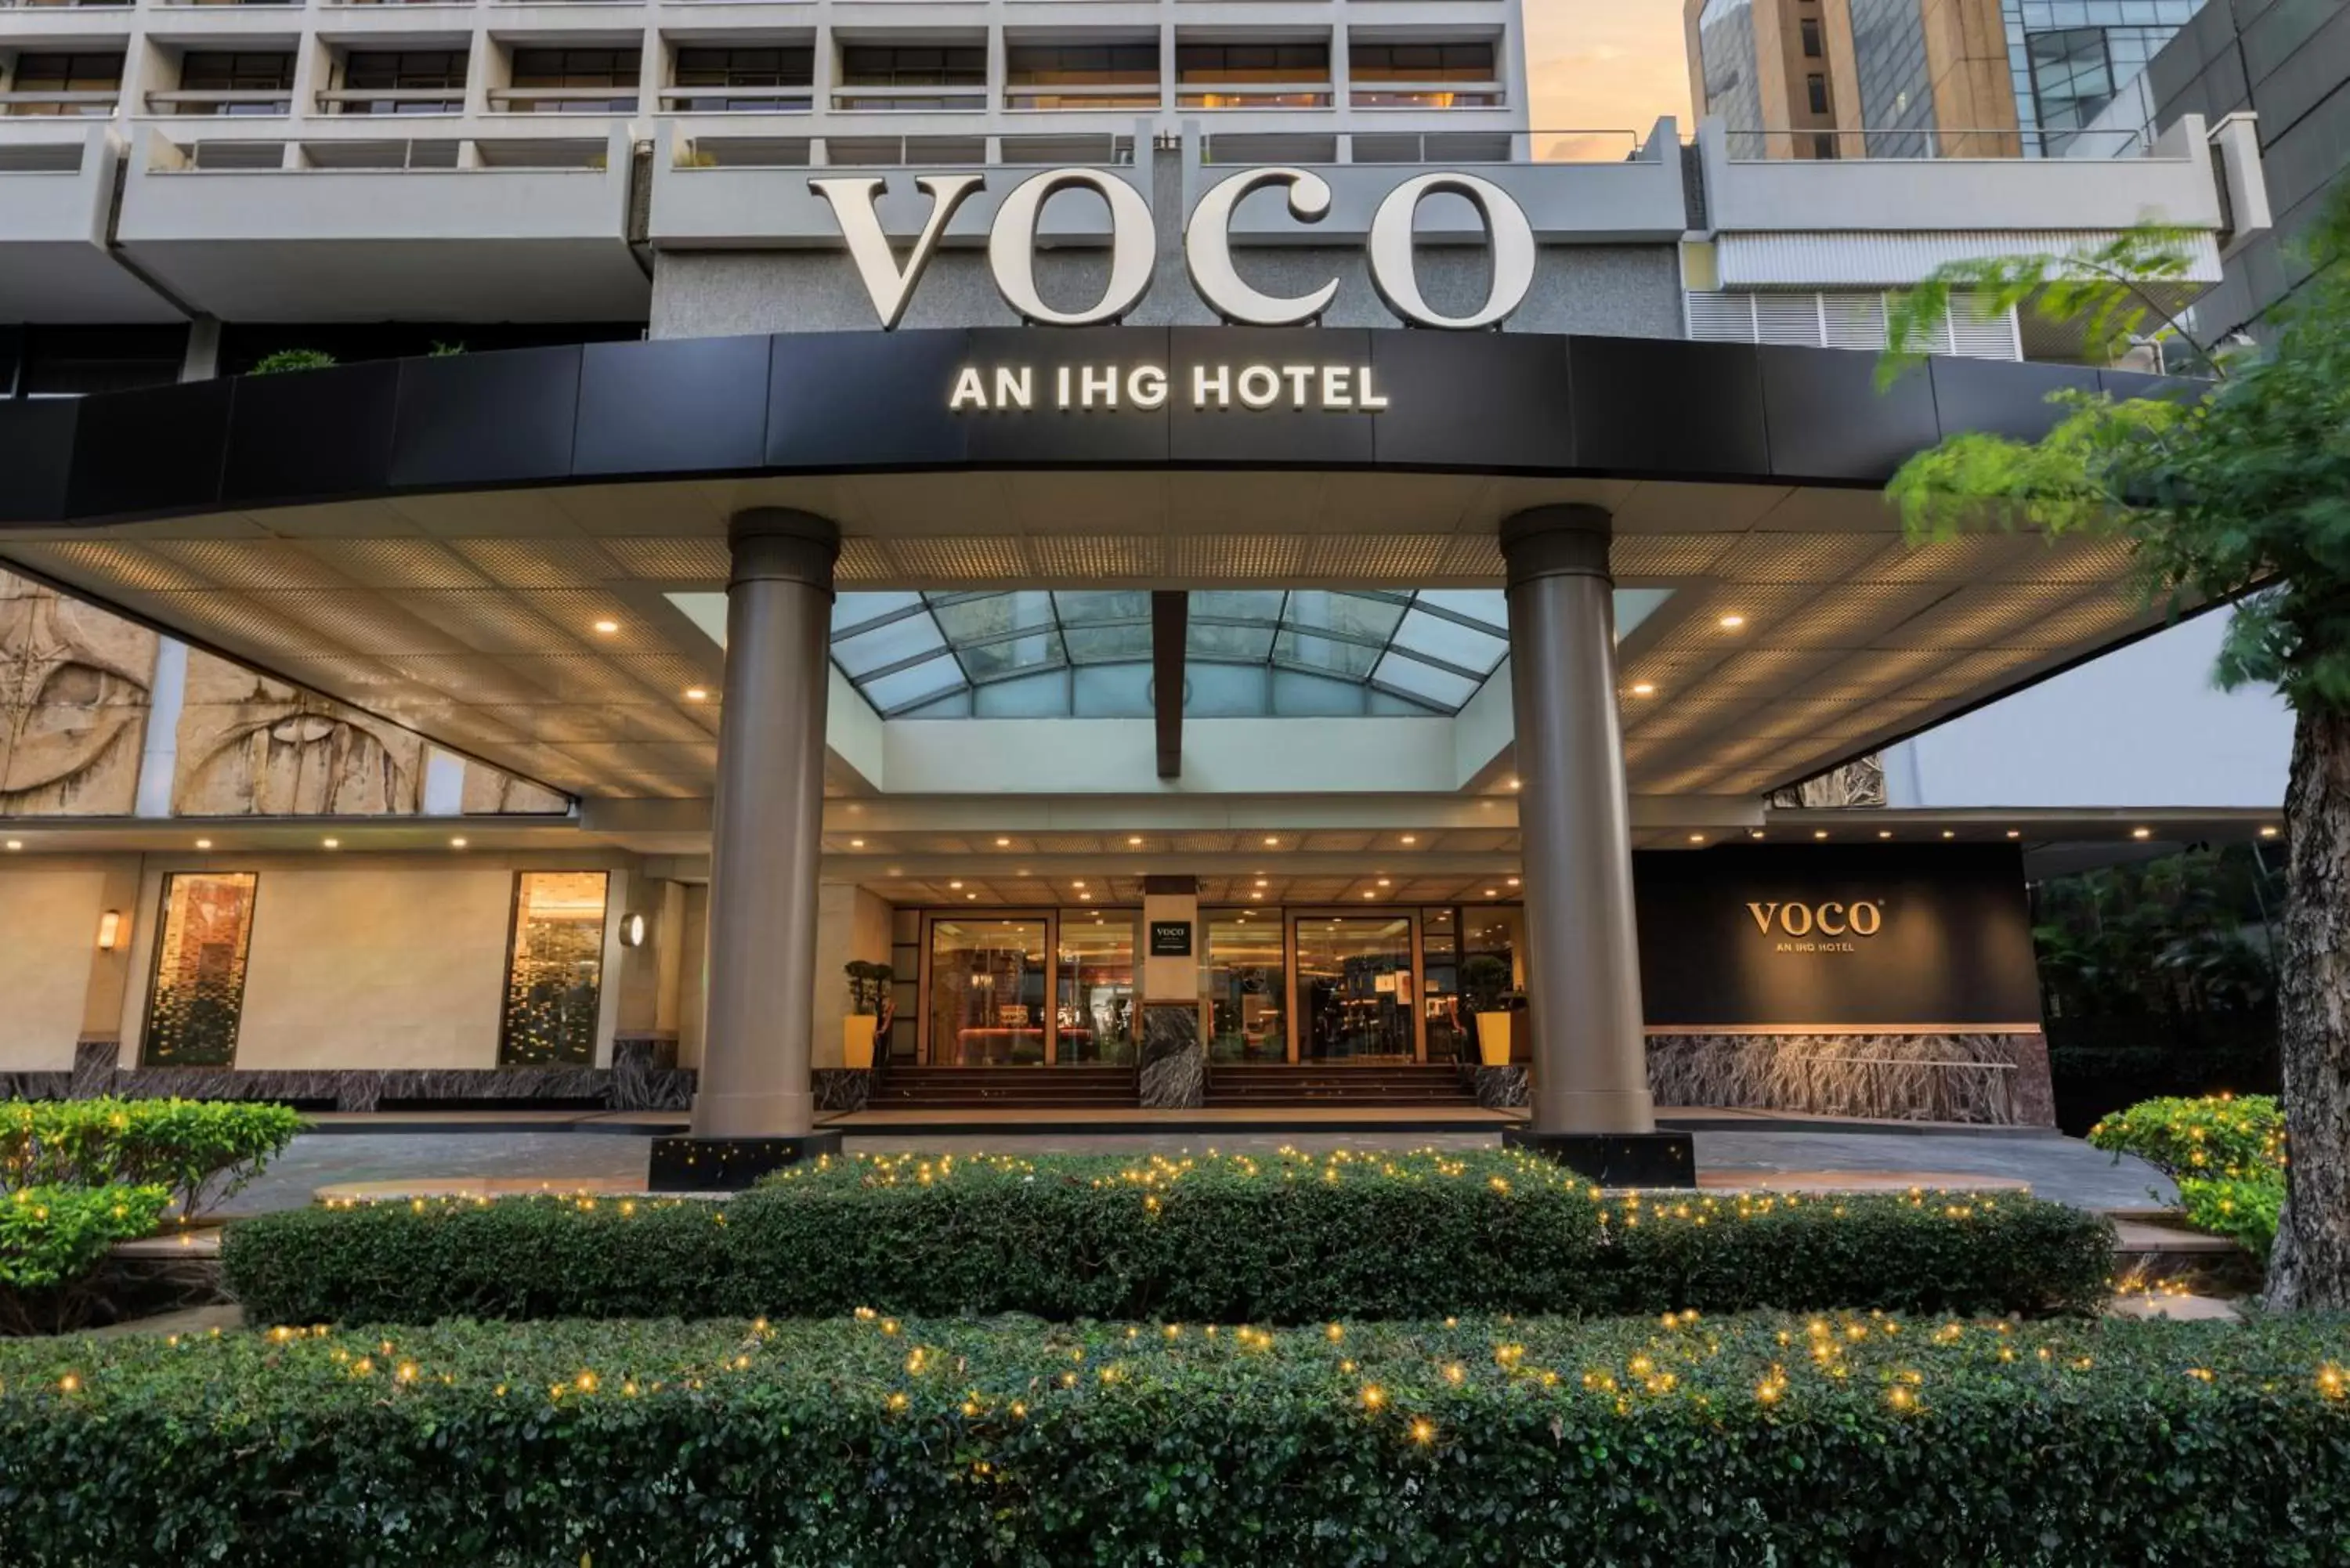 Property building in voco Orchard Singapore, an IHG Hotel